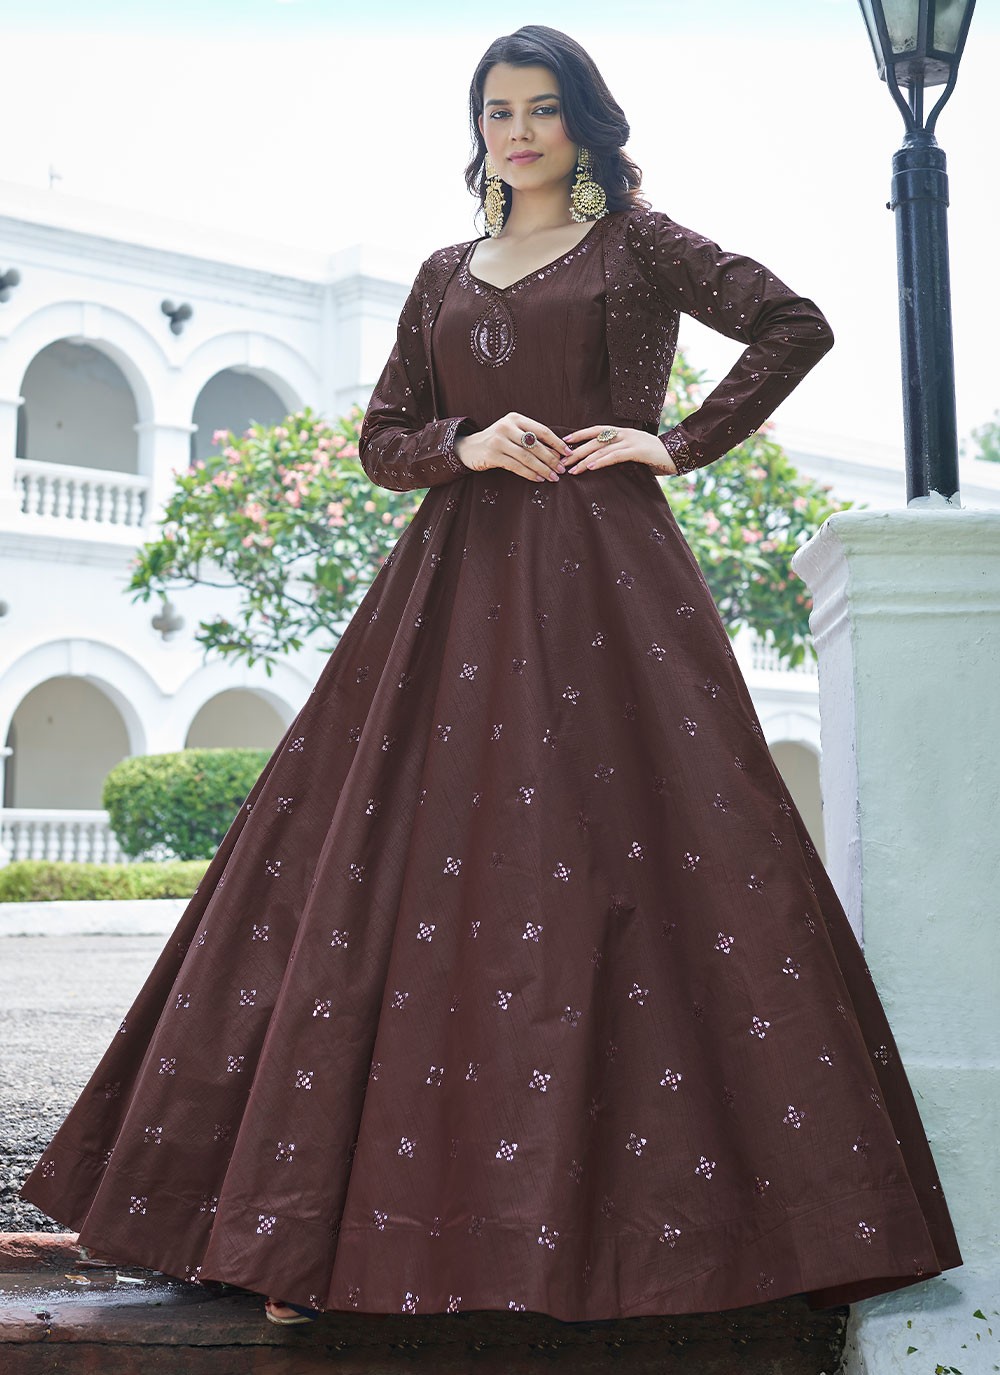 Embroidered Cotton Gown 